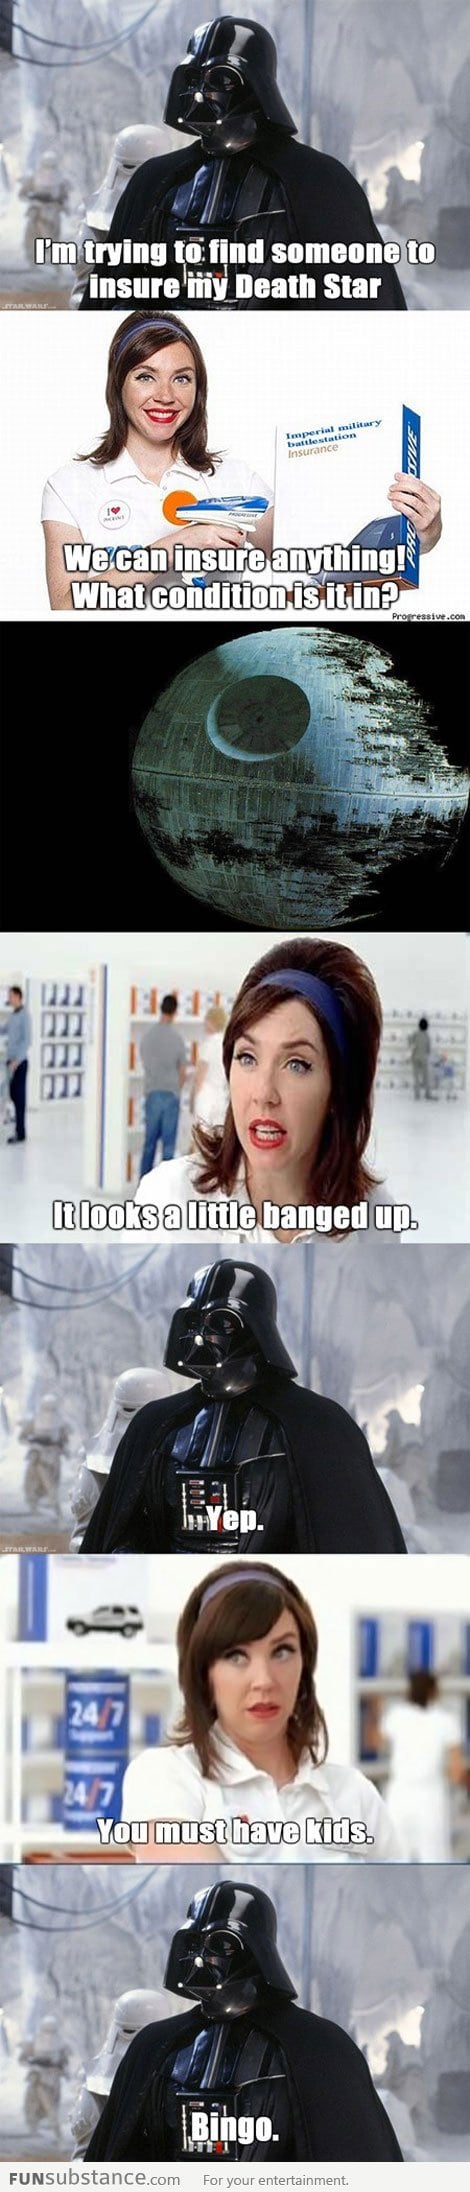 Darth Vader is looking for insurance